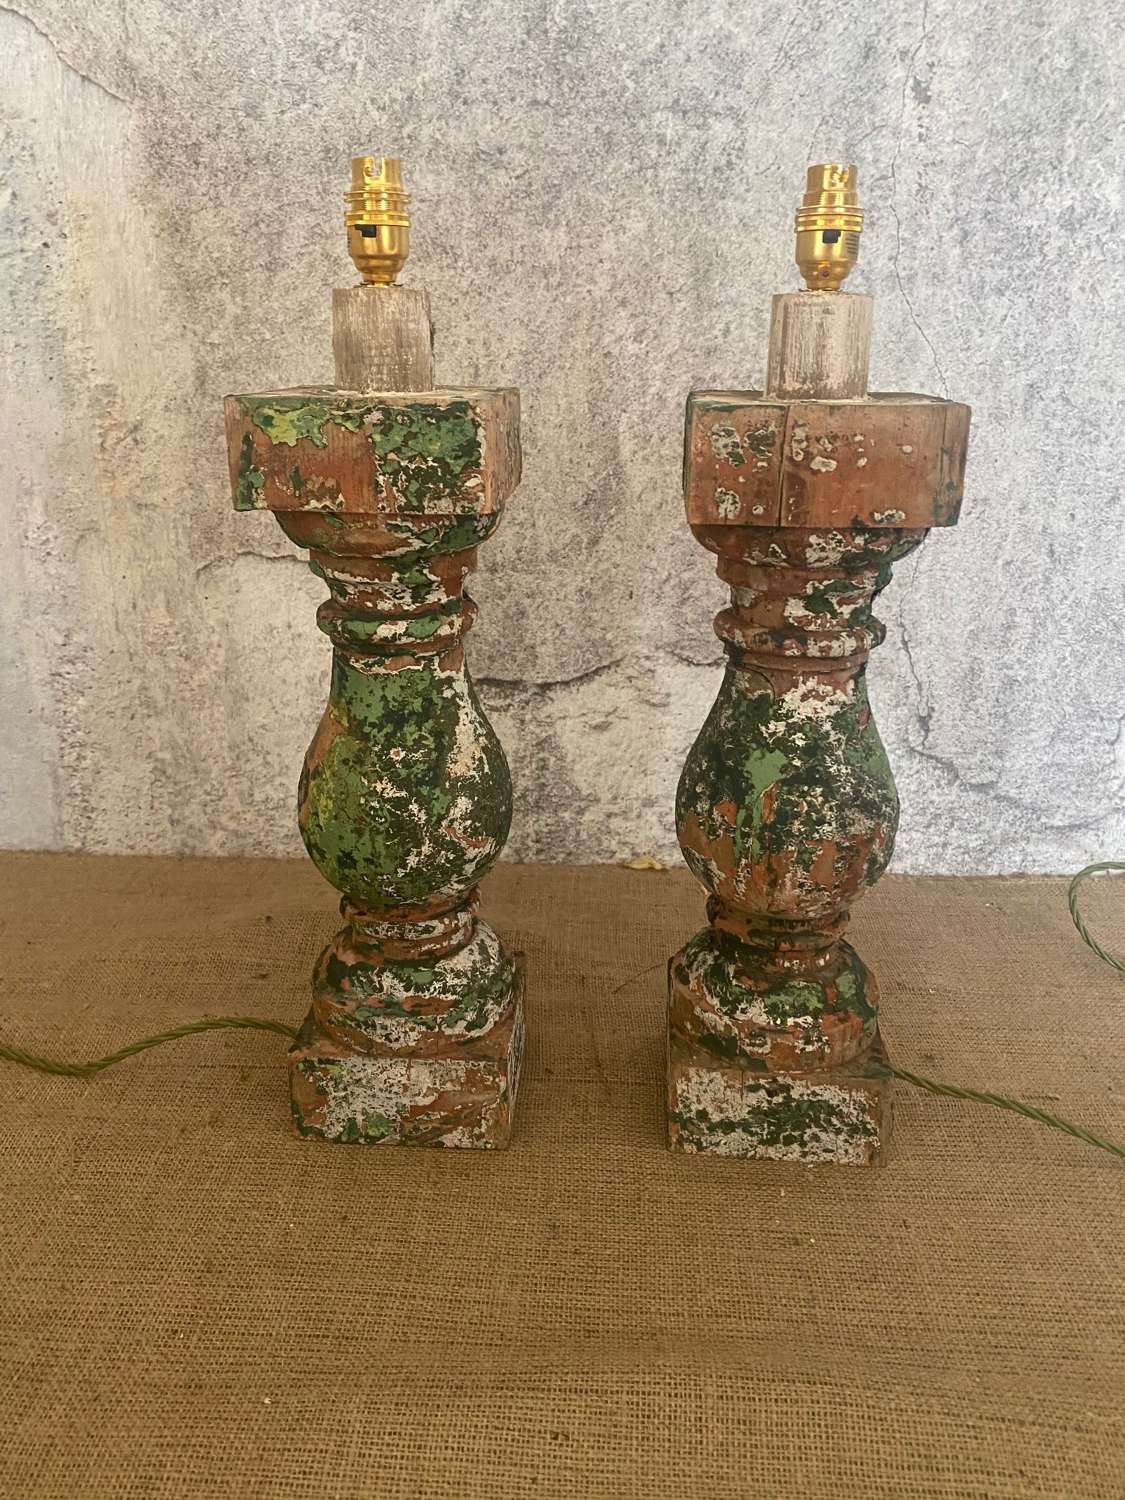 Pair of lamps made from antique balustrades with original paint